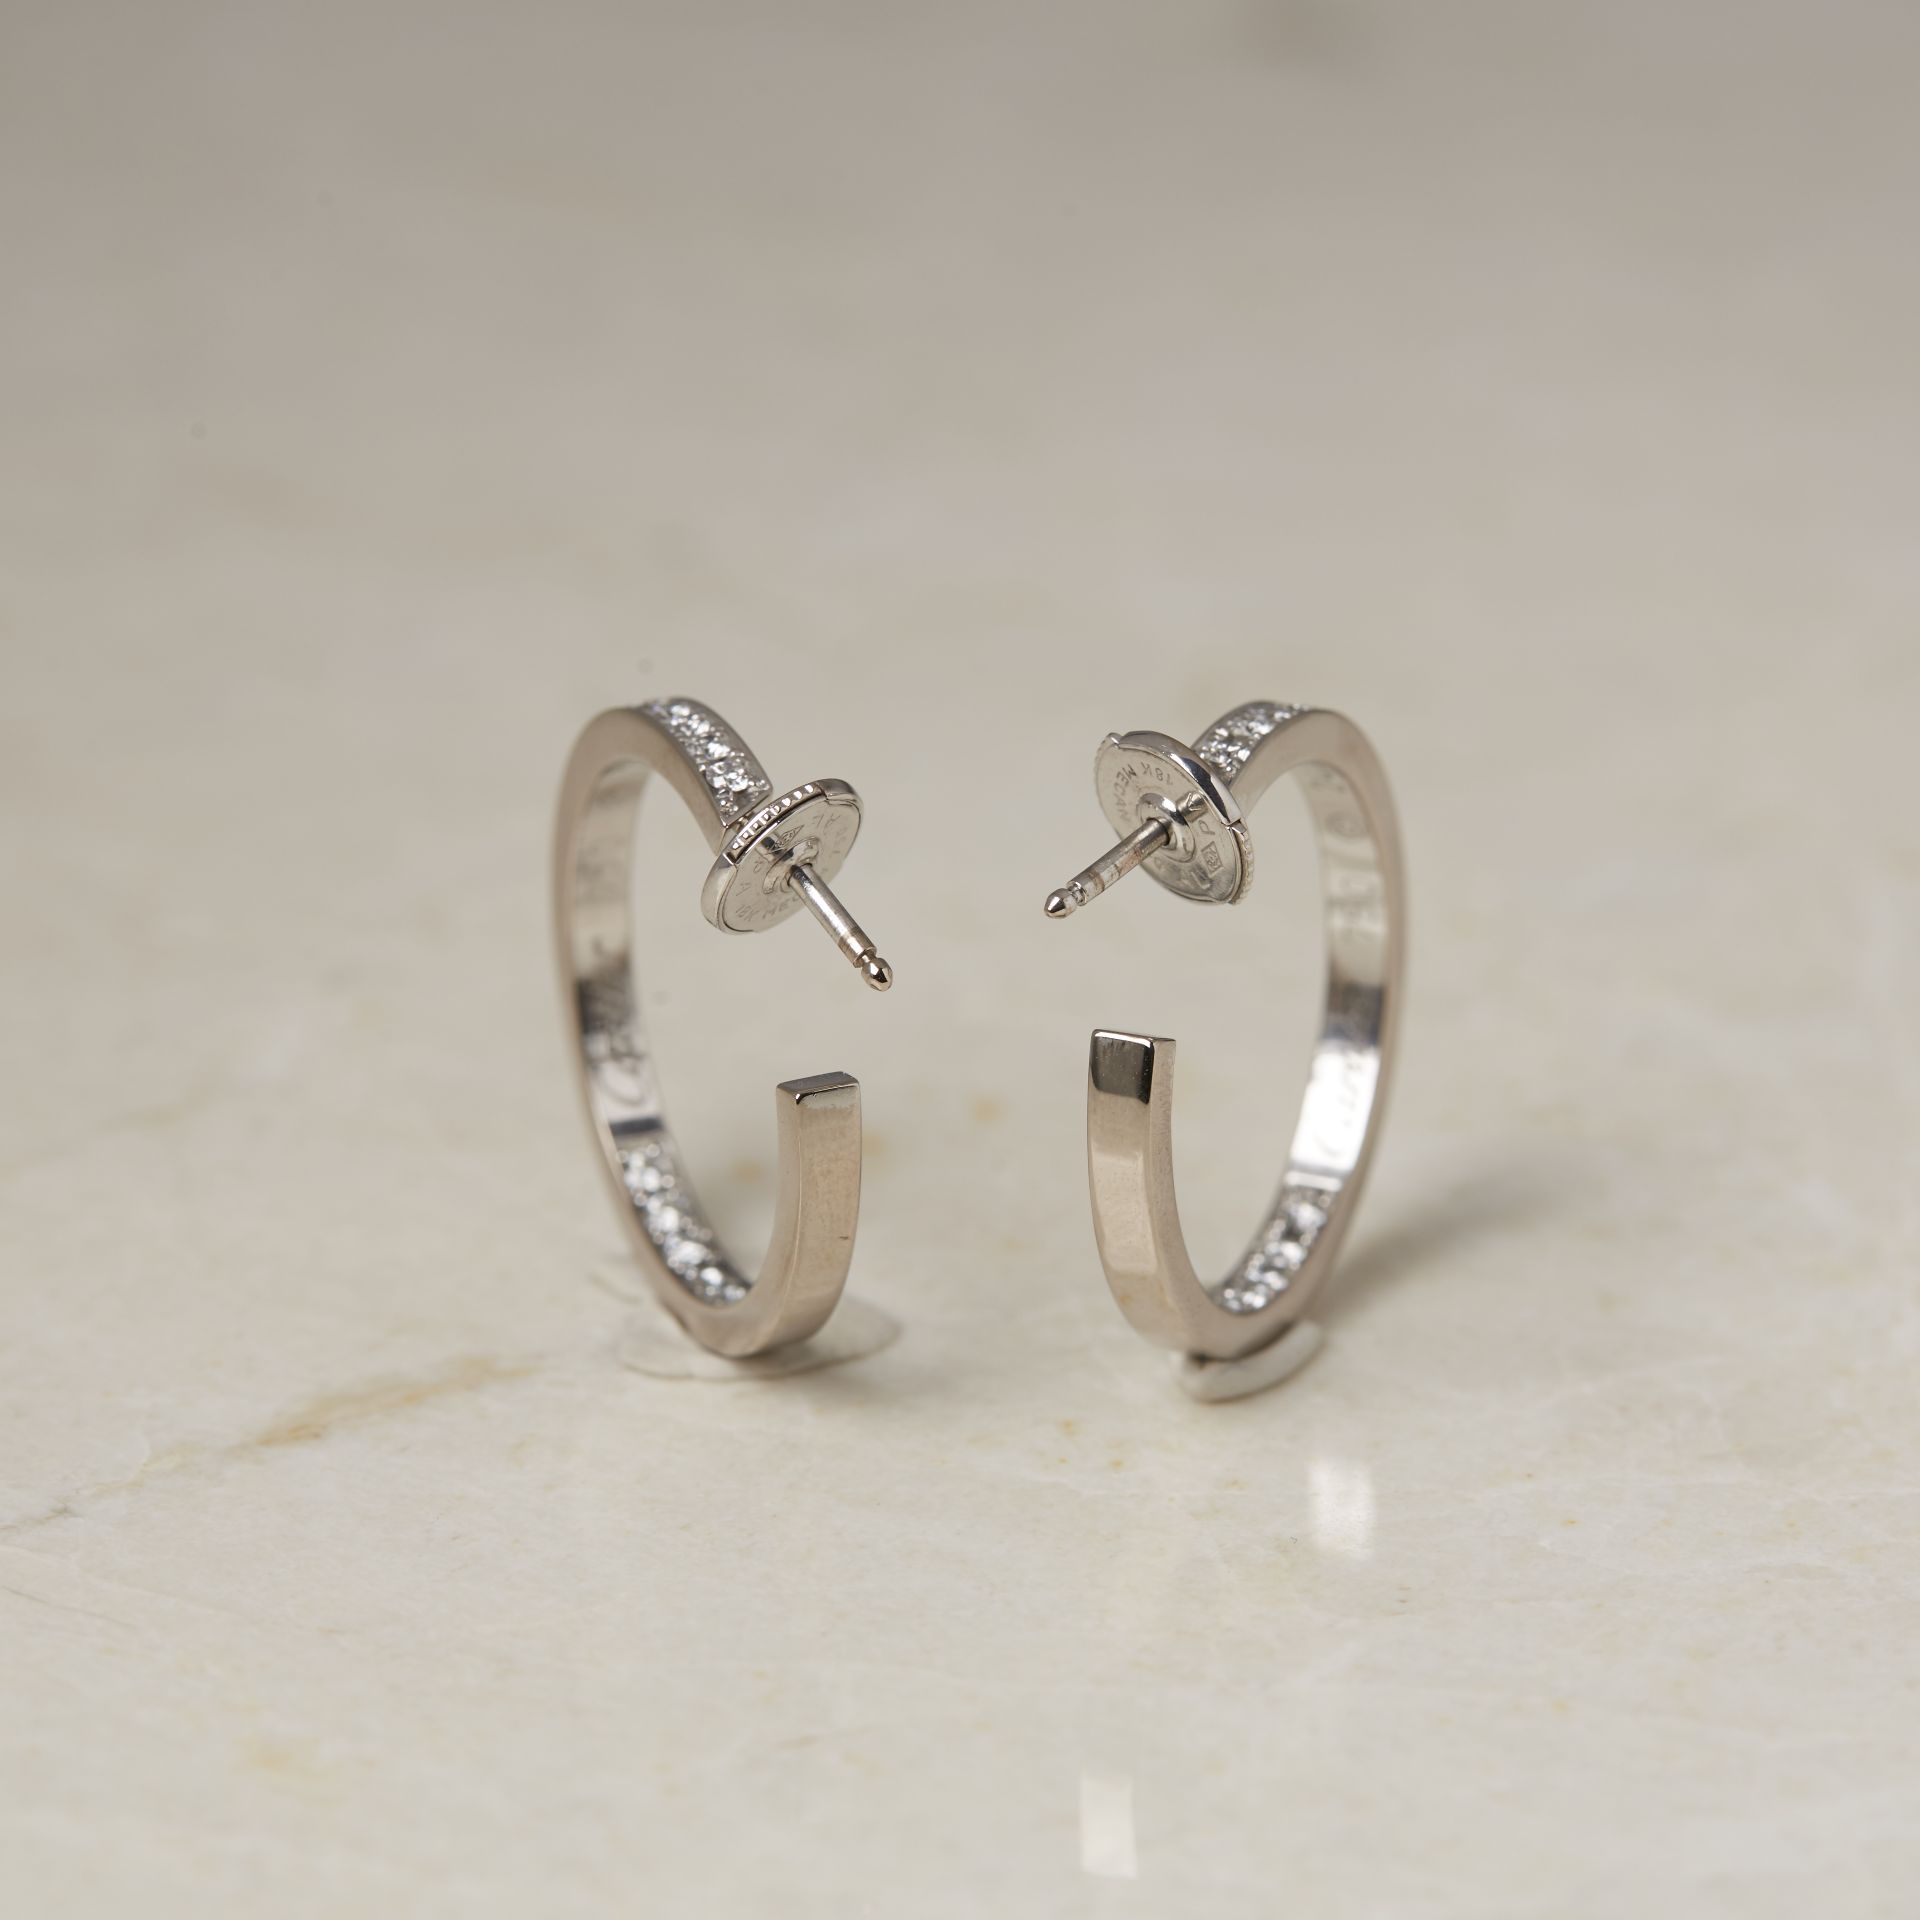 Cartier 18k White Gold 1.20ct Diamond Inside Out Hoop Earrings - Image 12 of 12